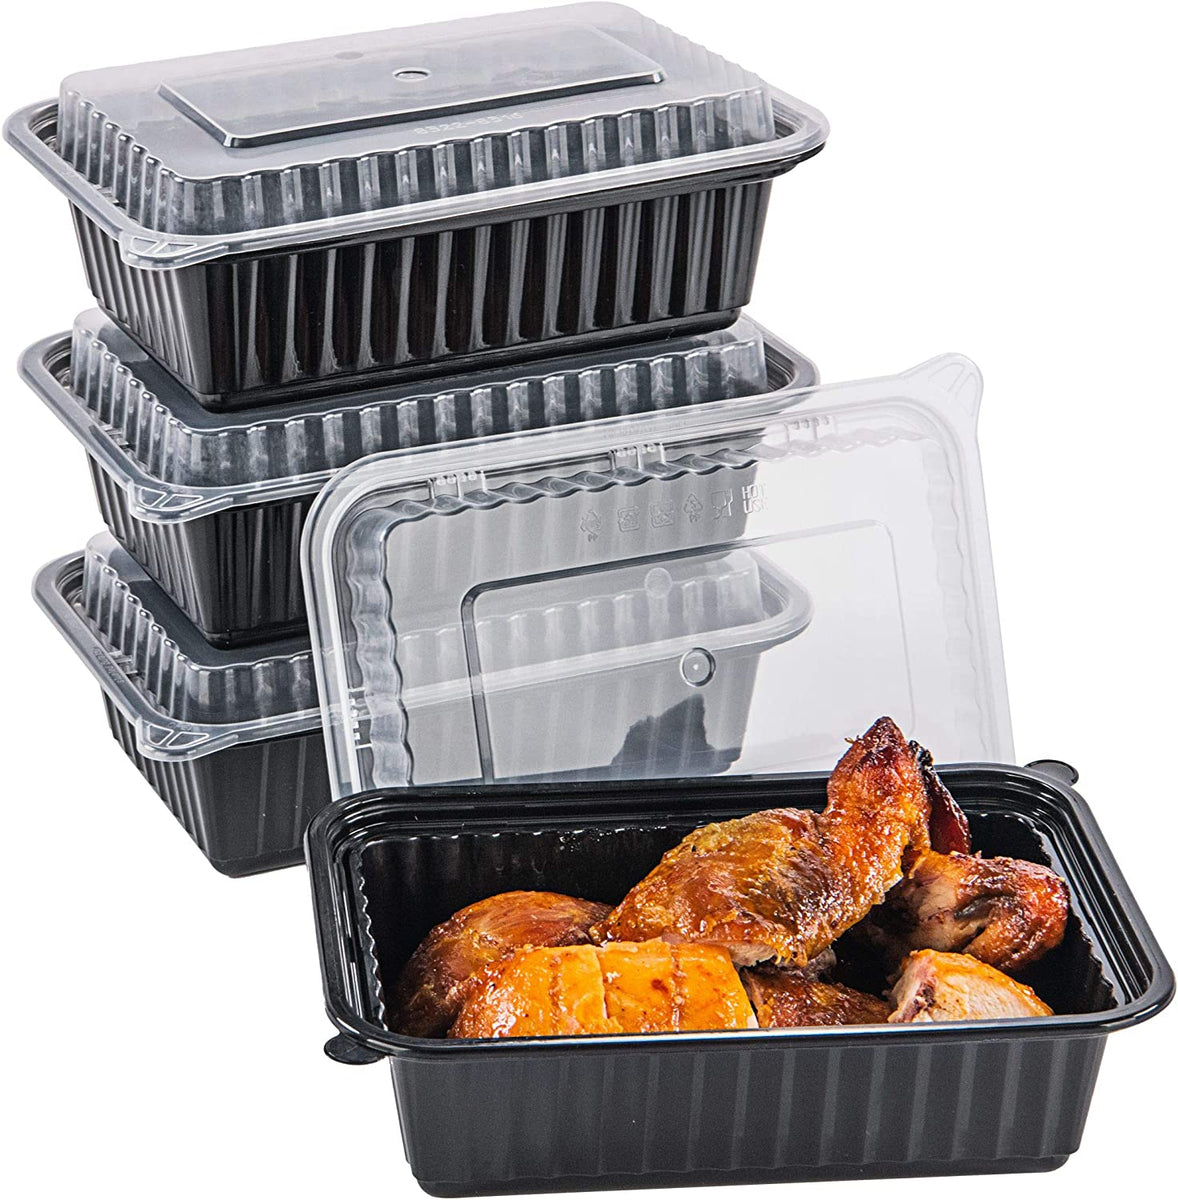 CTC-8311] Round Meal Prep Bowl Container with Lids - 16oz (50/100